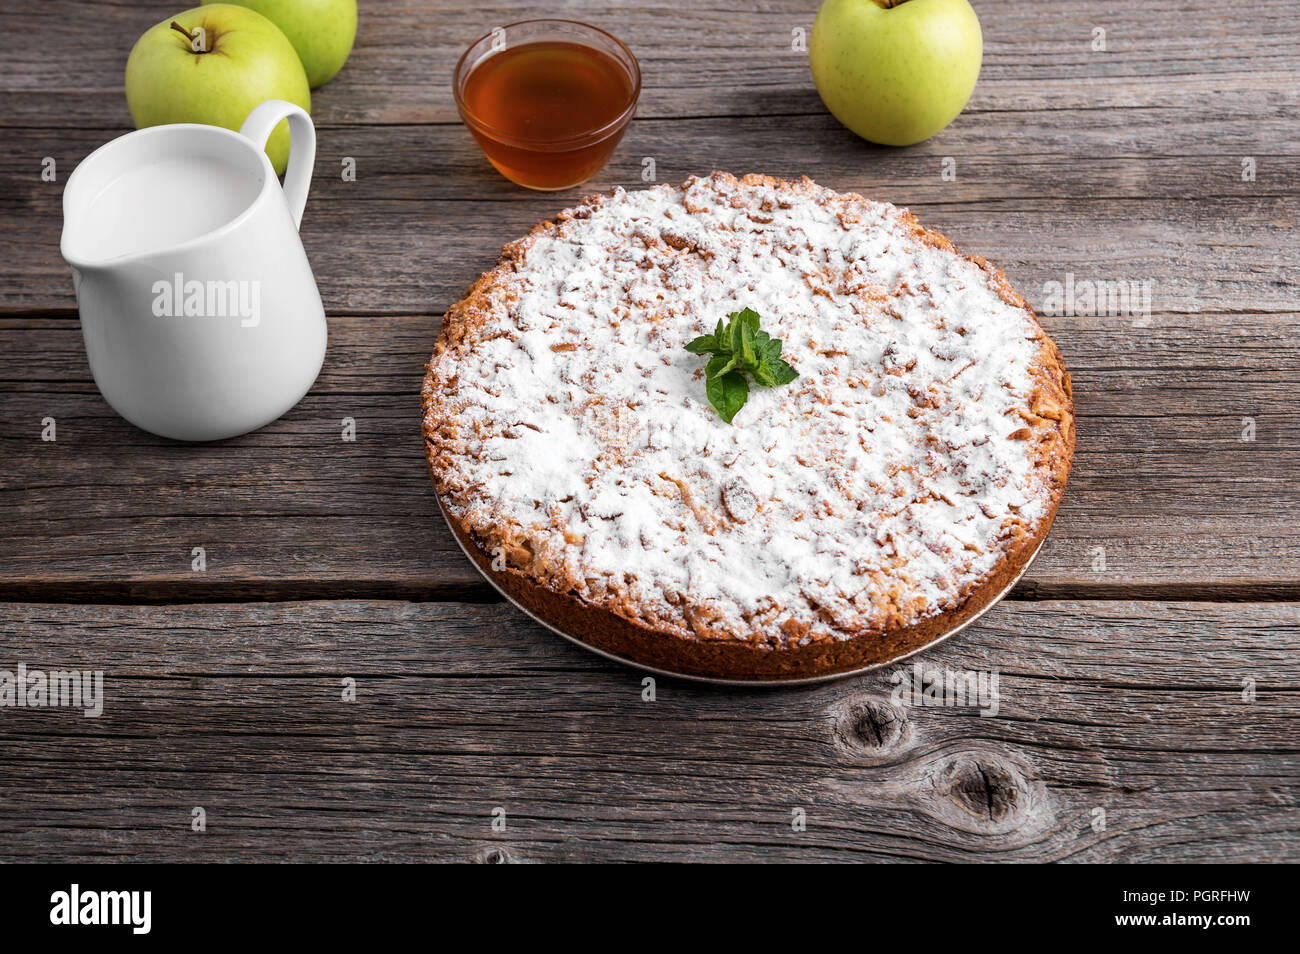 Homemade apple pie. It is lying on the wooden table. Stock Photo